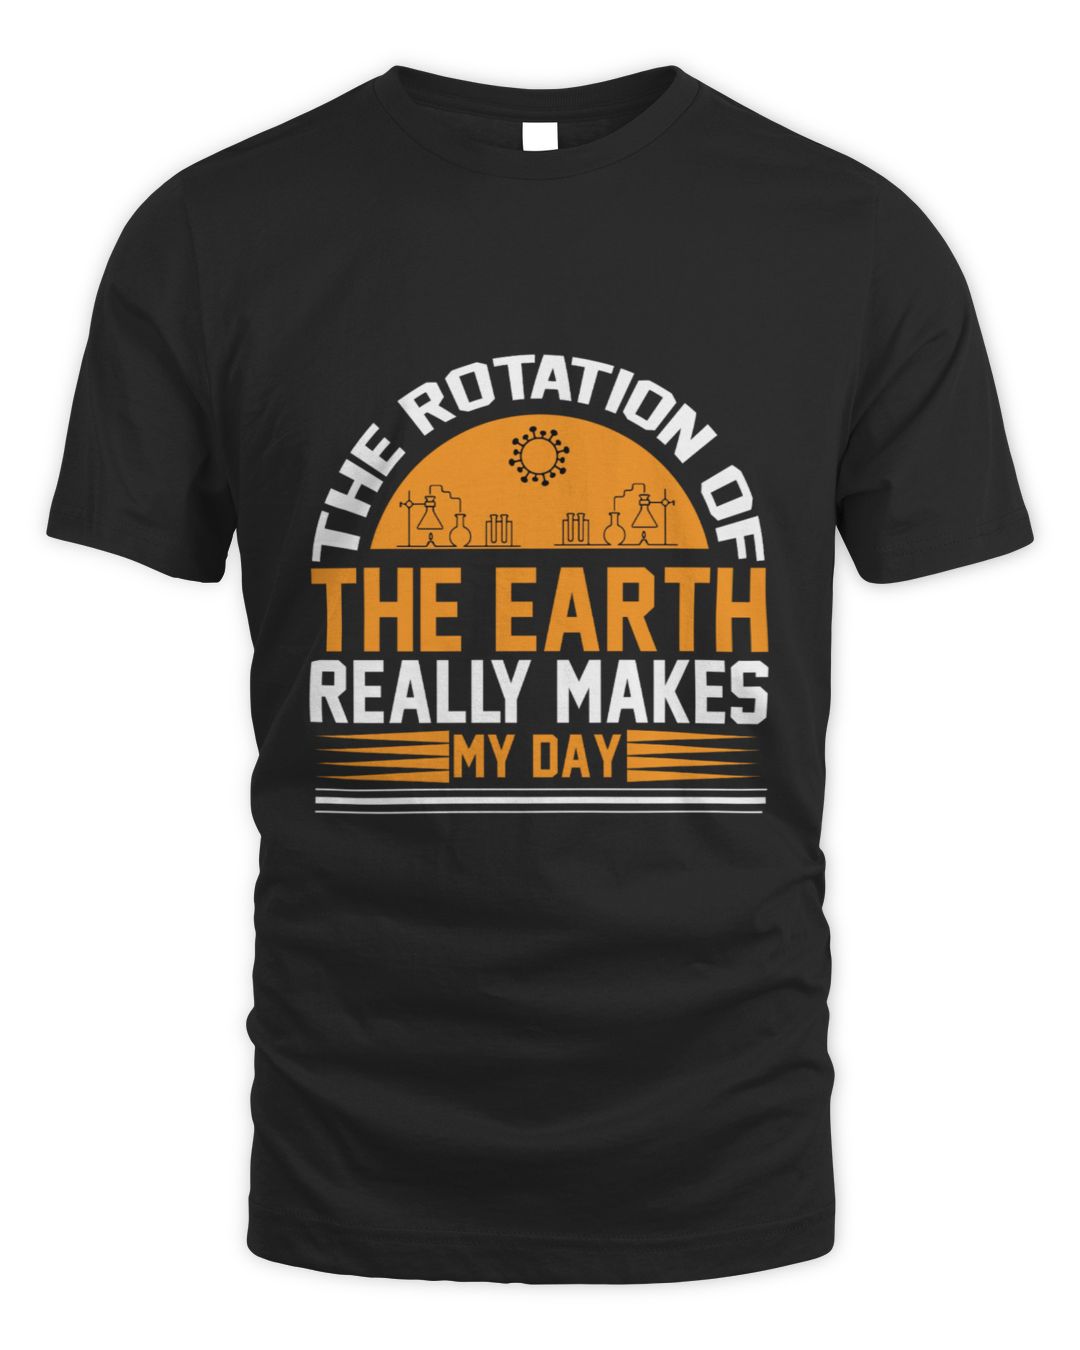 The Rotation Of The Earth Really Makes My Day | Science Store